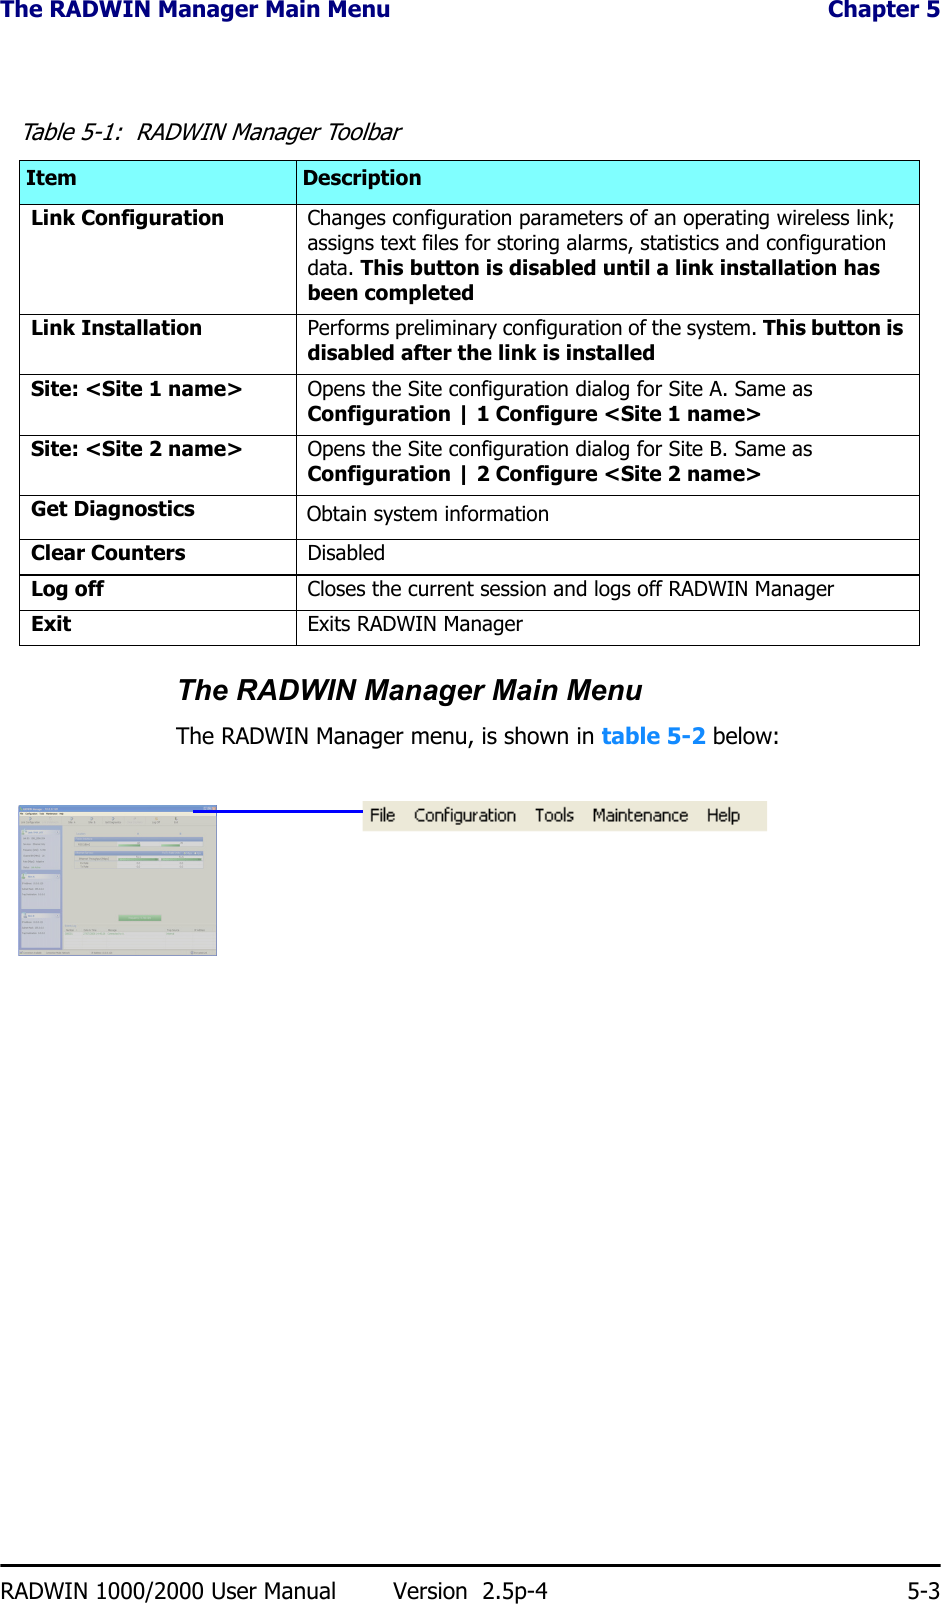 The RADWIN Manager Main Menu  Chapter 5RADWIN 1000/2000 User Manual Version  2.5p-4 5-3The RADWIN Manager Main MenuThe RADWIN Manager menu, is shown in table 5-2 below:Table 5-1:  RADWIN Manager ToolbarItem DescriptionLink Configuration Changes configuration parameters of an operating wireless link; assigns text files for storing alarms, statistics and configuration data. This button is disabled until a link installation has been completedLink Installation Performs preliminary configuration of the system. This button is disabled after the link is installedSite: &lt;Site 1 name&gt; Opens the Site configuration dialog for Site A. Same as Configuration | 1 Configure &lt;Site 1 name&gt;Site: &lt;Site 2 name&gt; Opens the Site configuration dialog for Site B. Same as Configuration | 2 Configure &lt;Site 2 name&gt;Get Diagnostics Obtain system informationClear Counters DisabledLog off Closes the current session and logs off RADWIN ManagerExit Exits RADWIN Manager